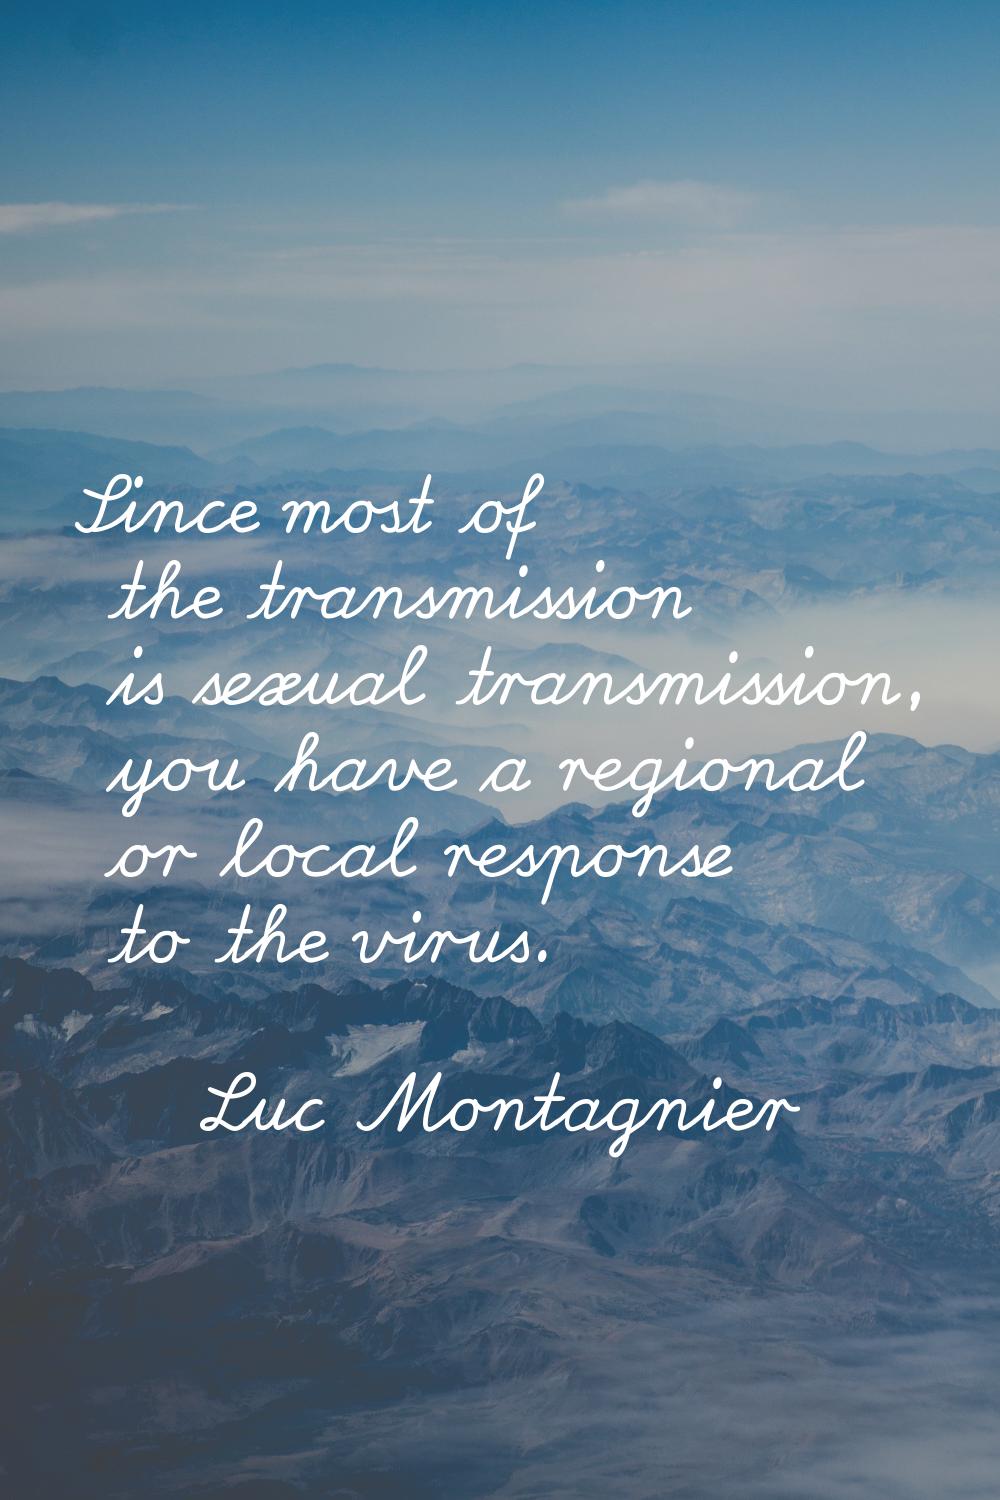 Since most of the transmission is sexual transmission, you have a regional or local response to the